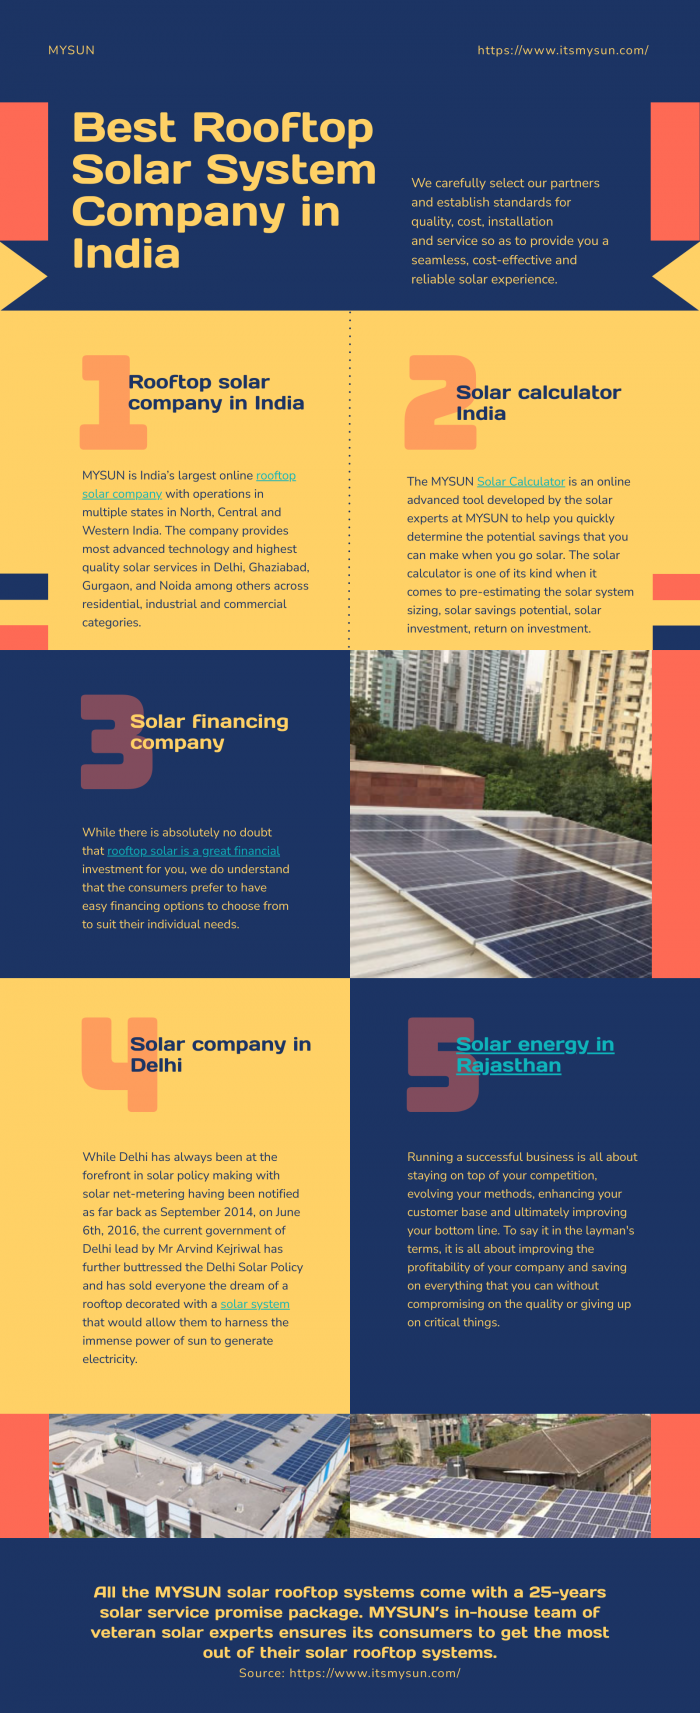 Leading Rooftop Solar System Company in India